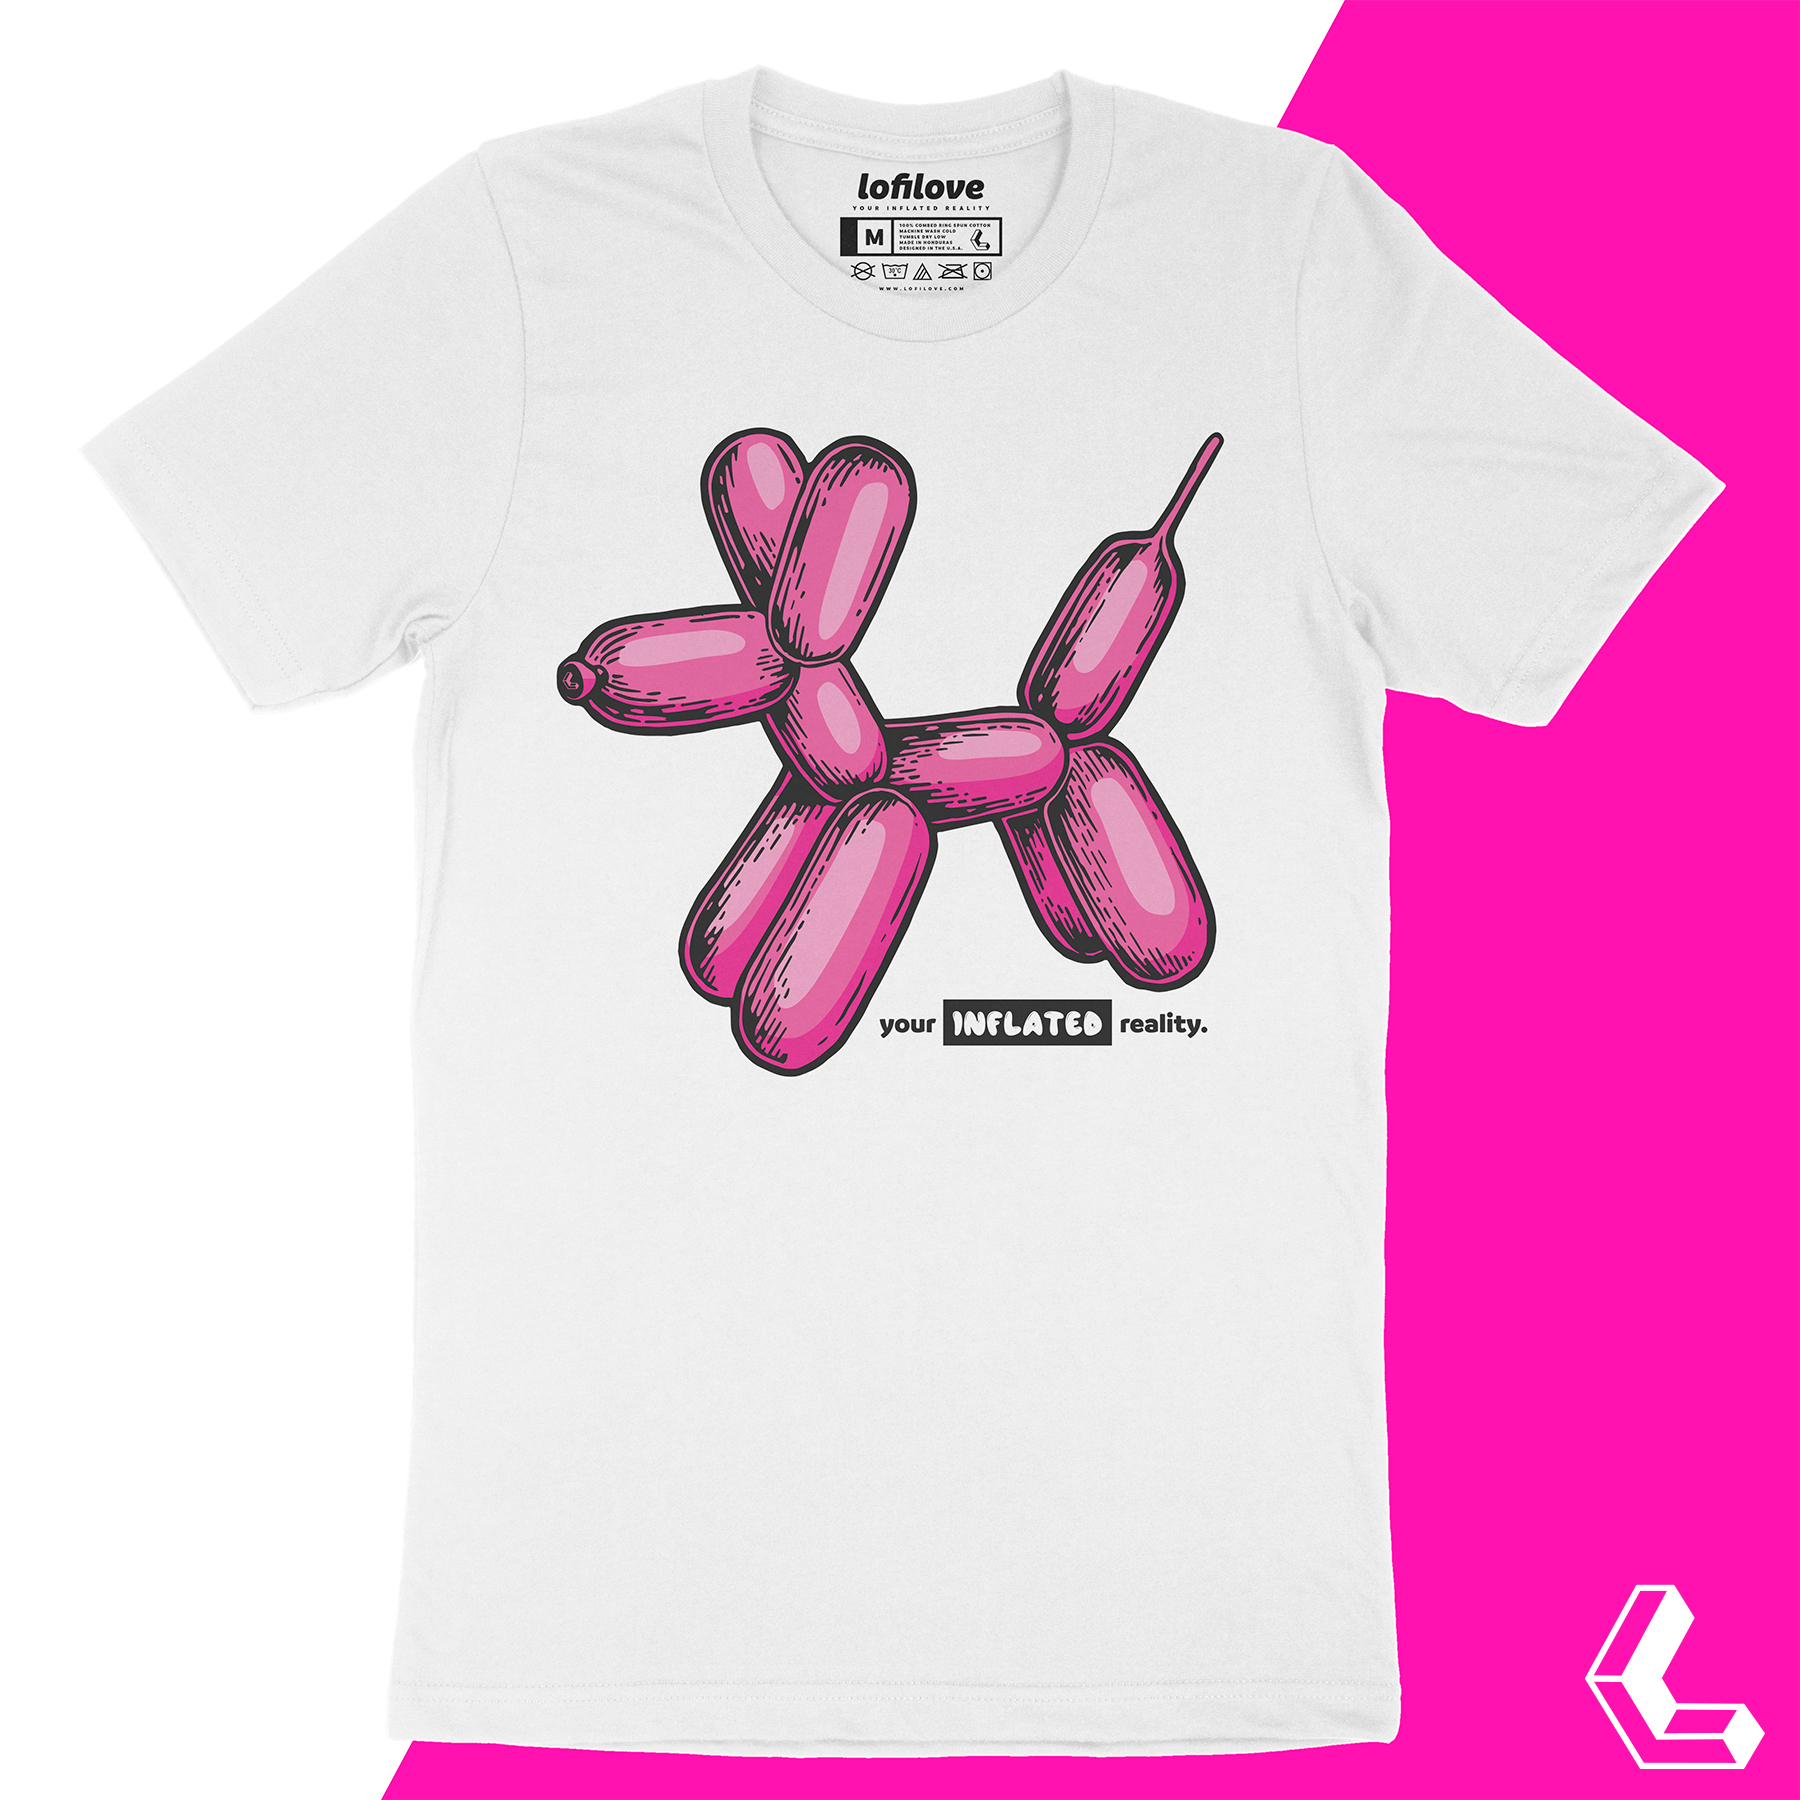 lofilove-your-inflated-reality-tee-1